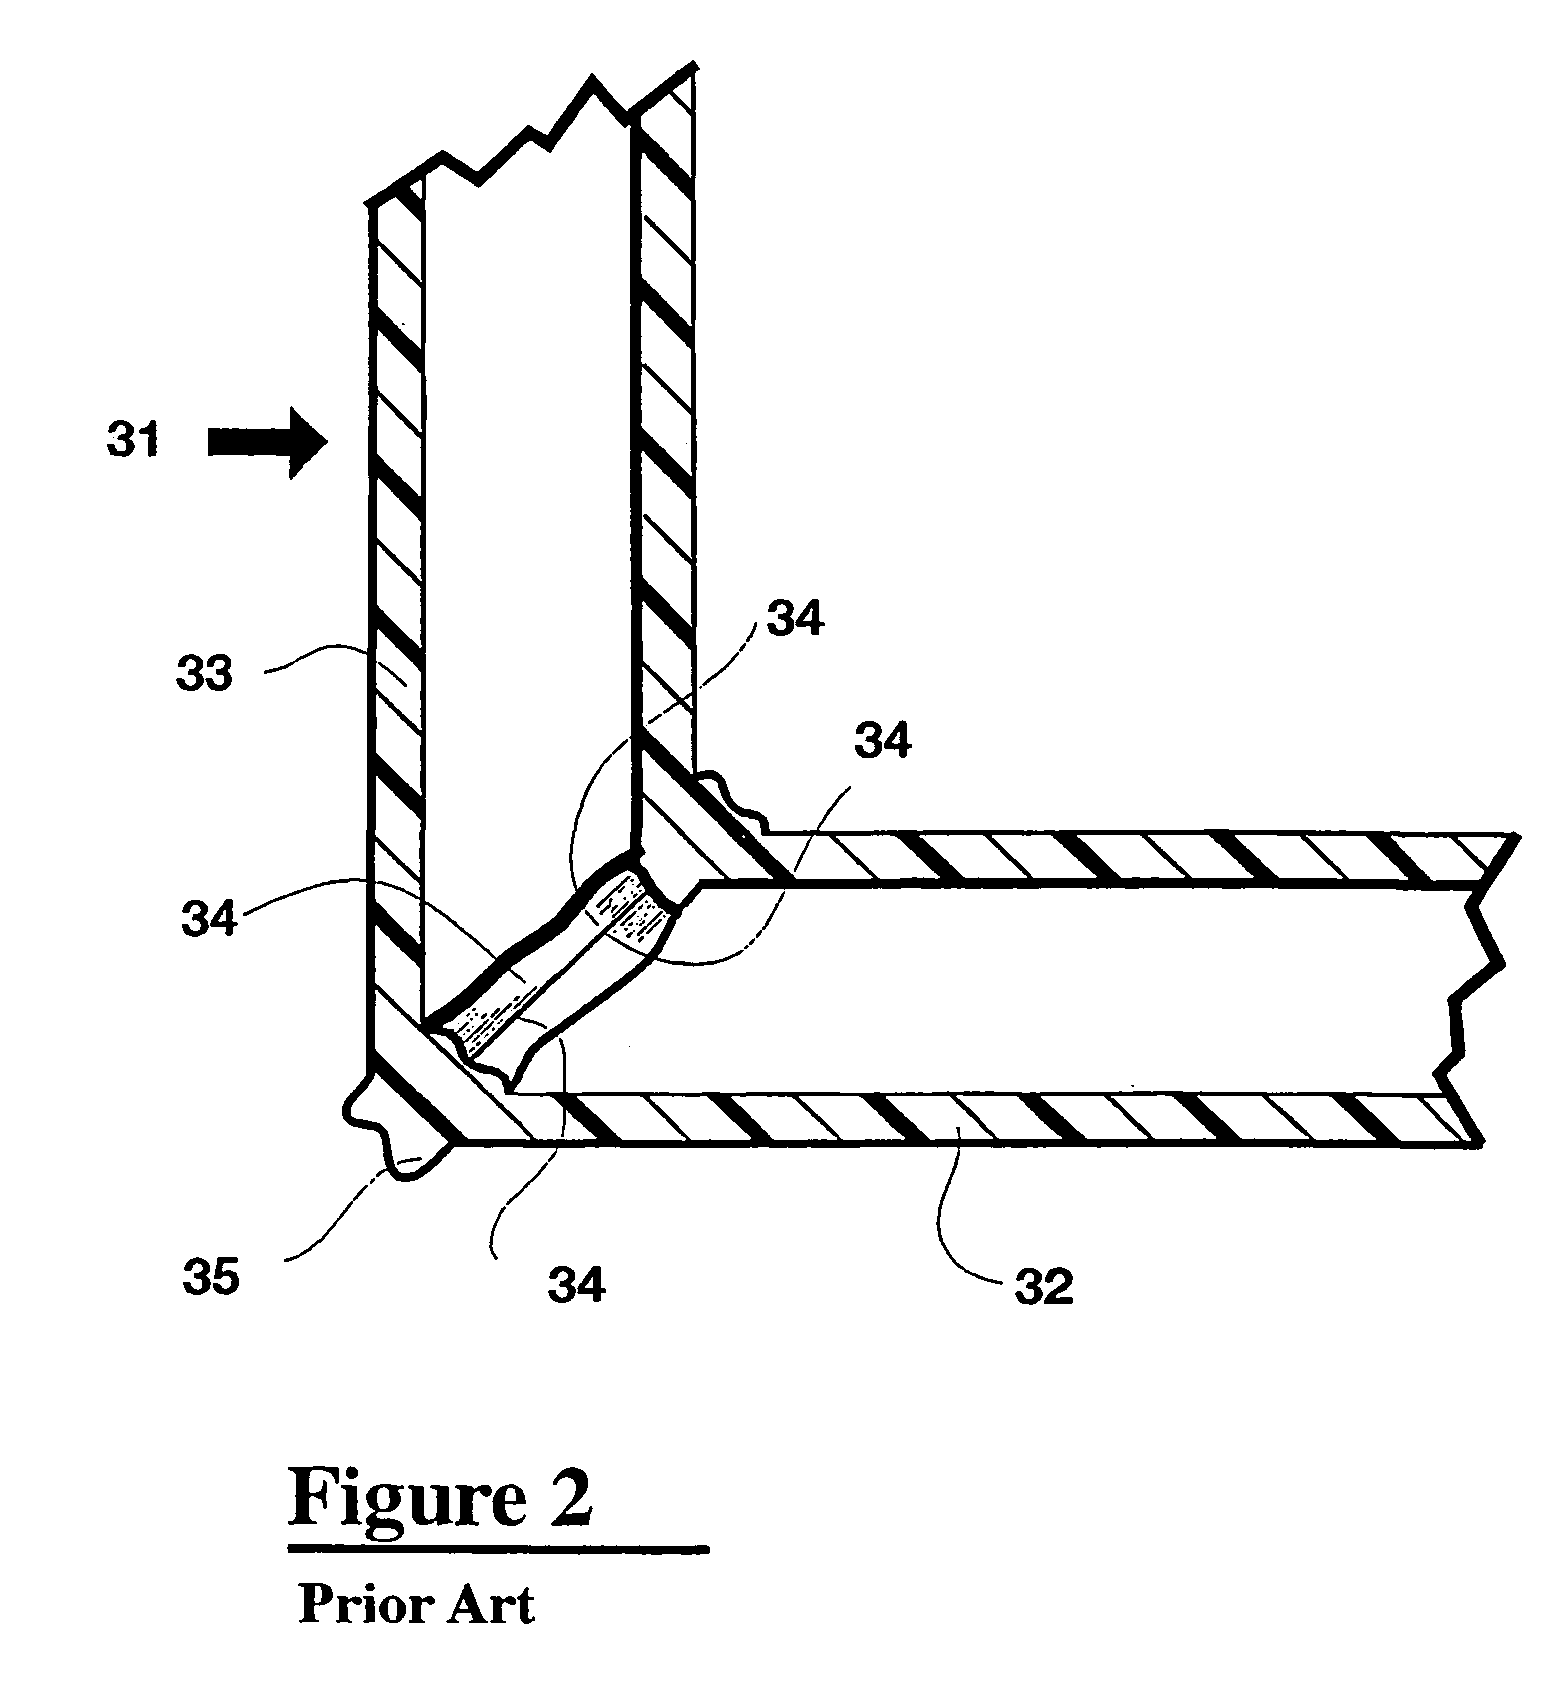 Method and apparatus for vibration welding of thermoplastic components